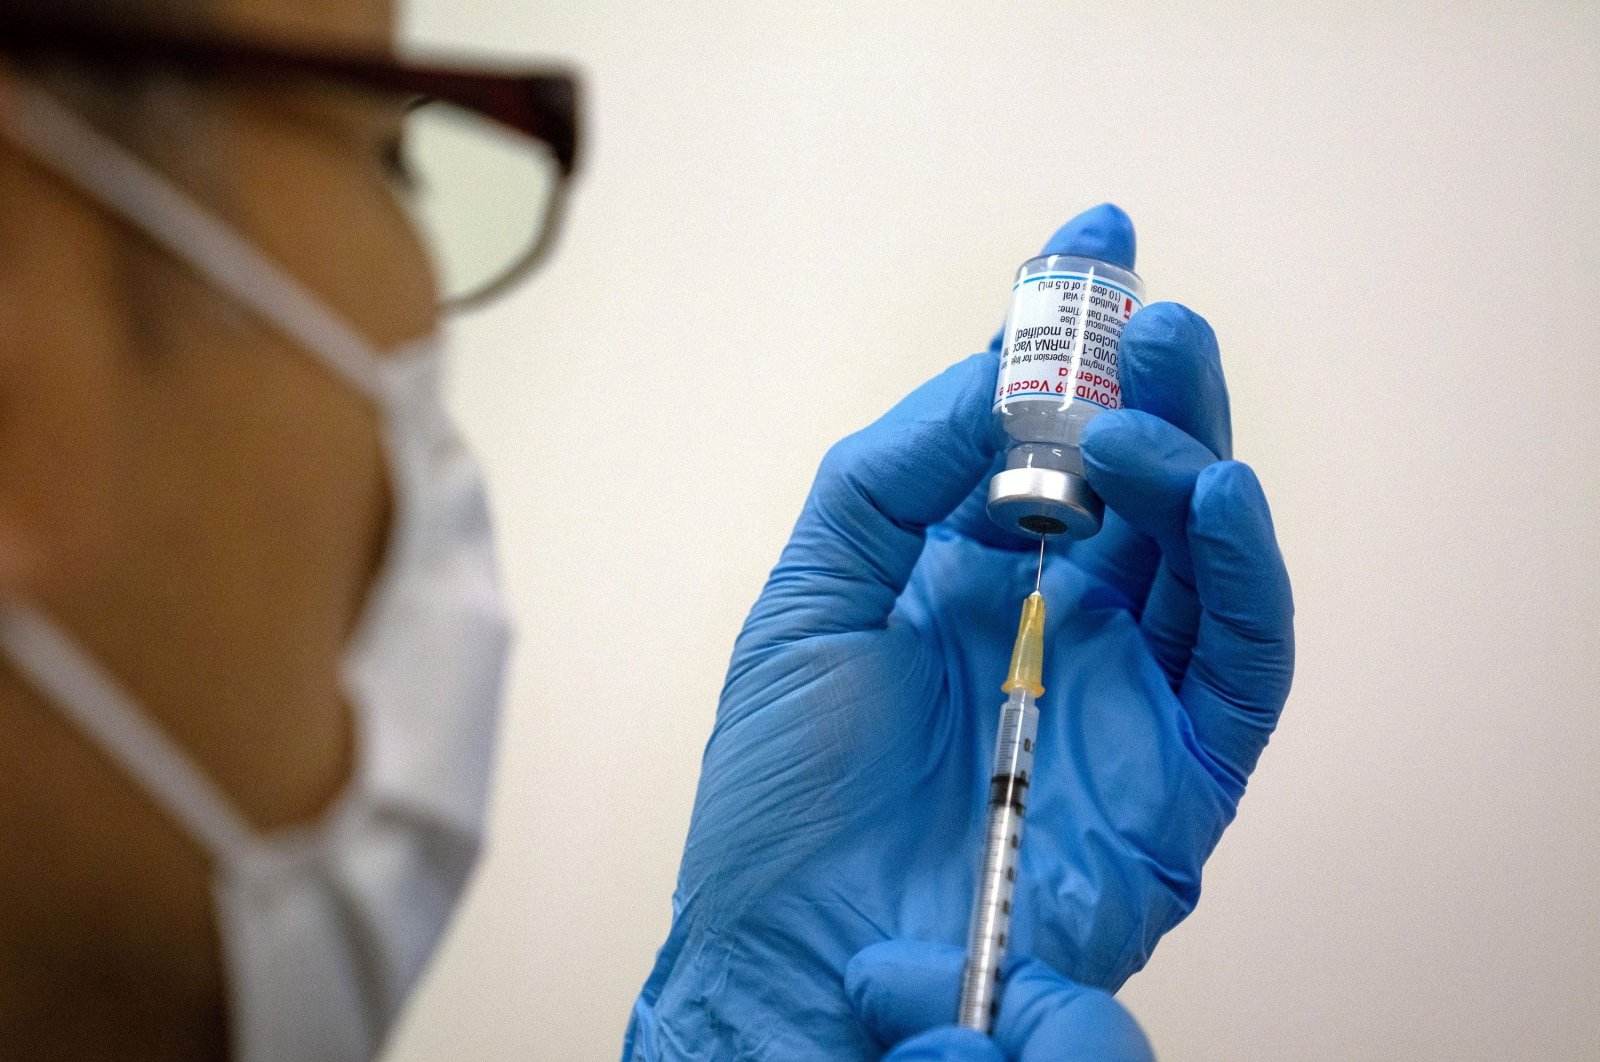 A medical worker prepares a Moderna COVID-19 vaccine to be administered at the newly opened mass vaccination center in Tokyo, Japan, May 24, 2021. (Reuters Photo)